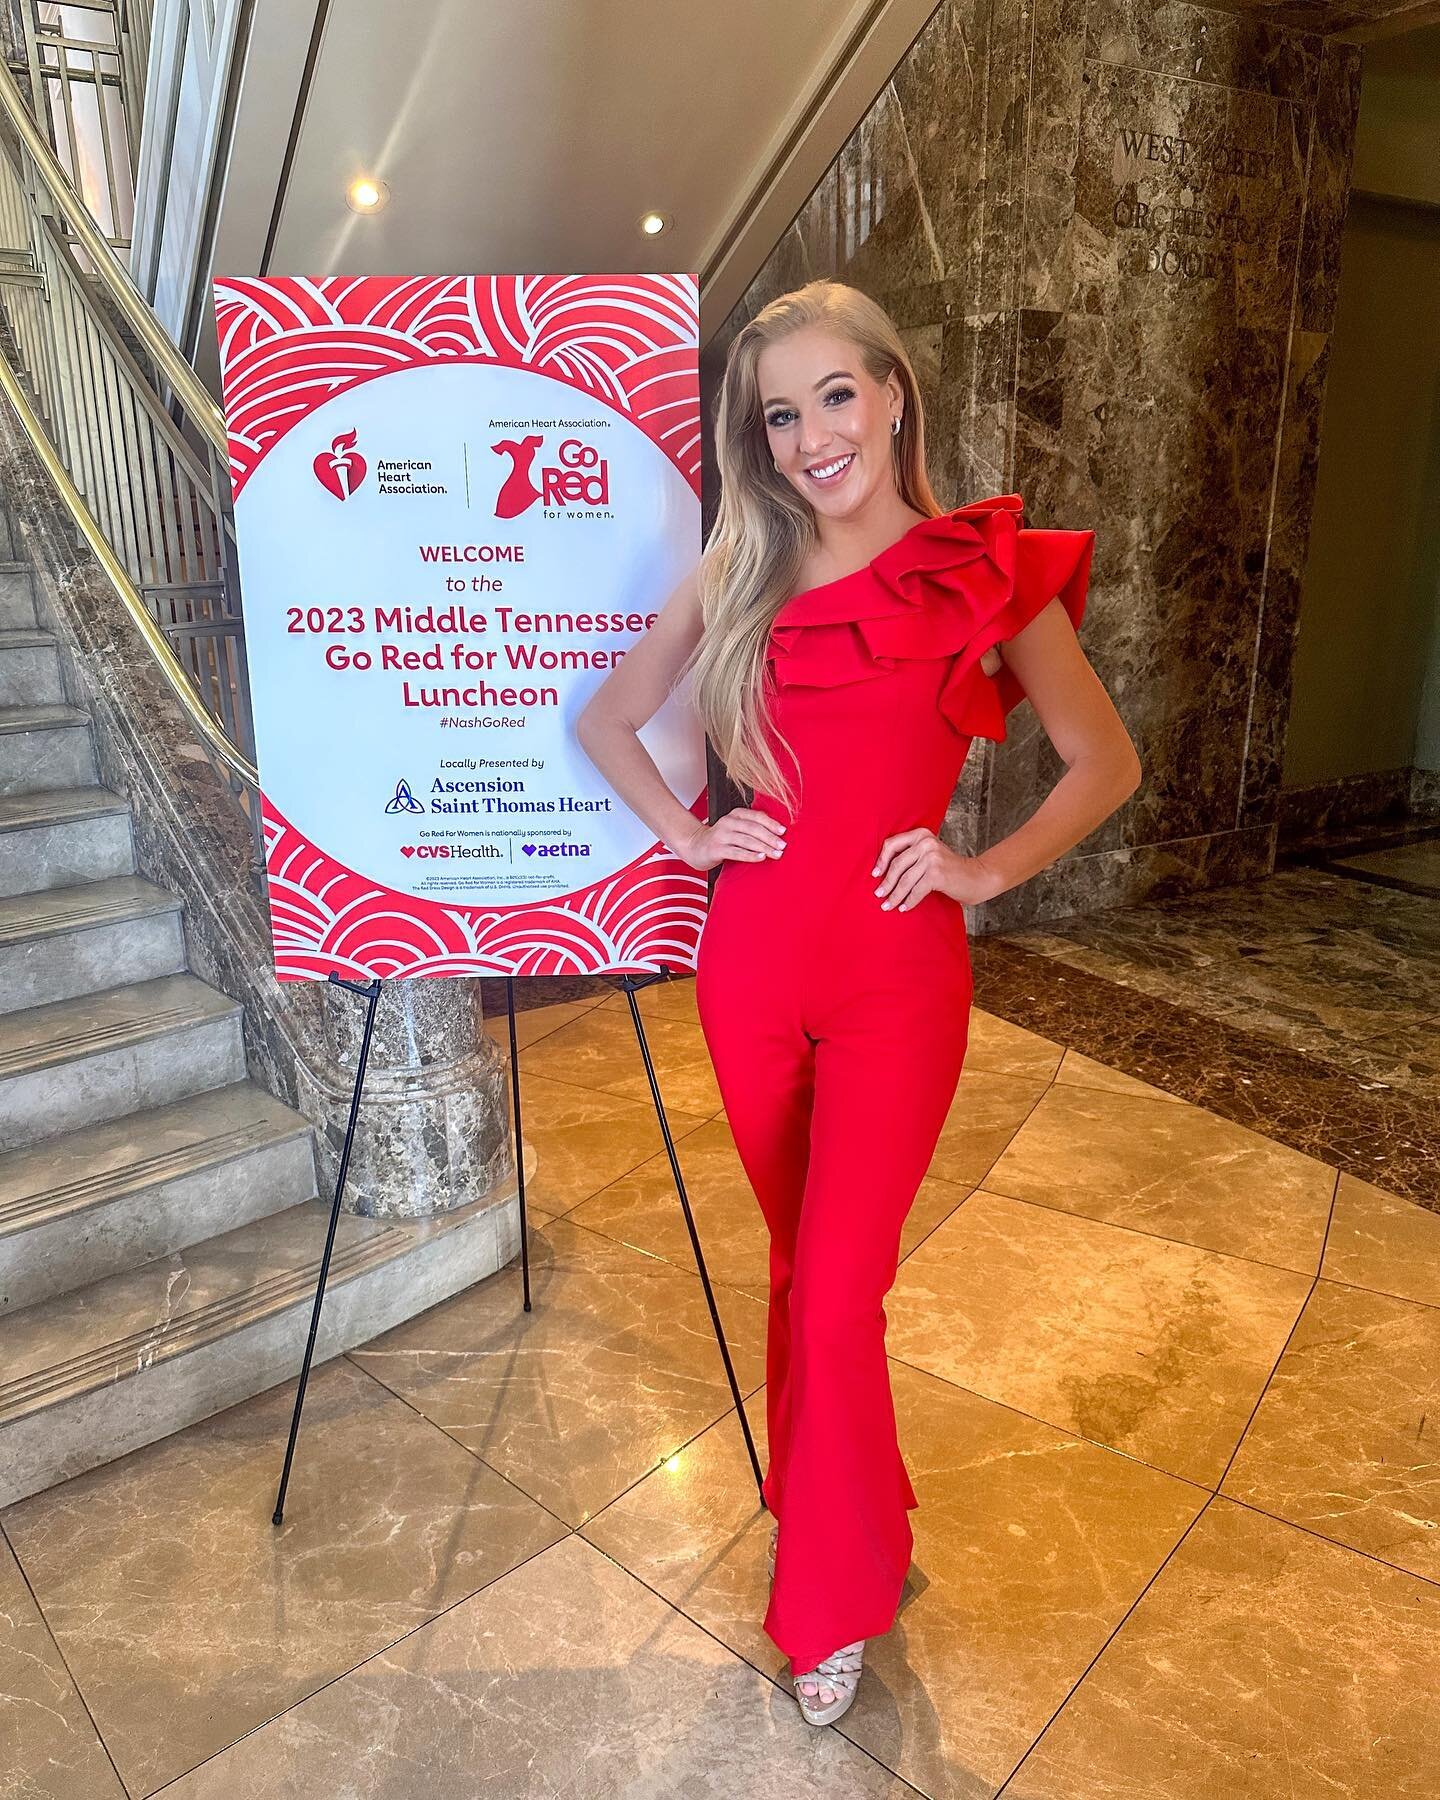 Savannah Maddison was honored to attend the American Heart Association #goredforwomen luncheon today! Thank you @ahatennessee ❤️